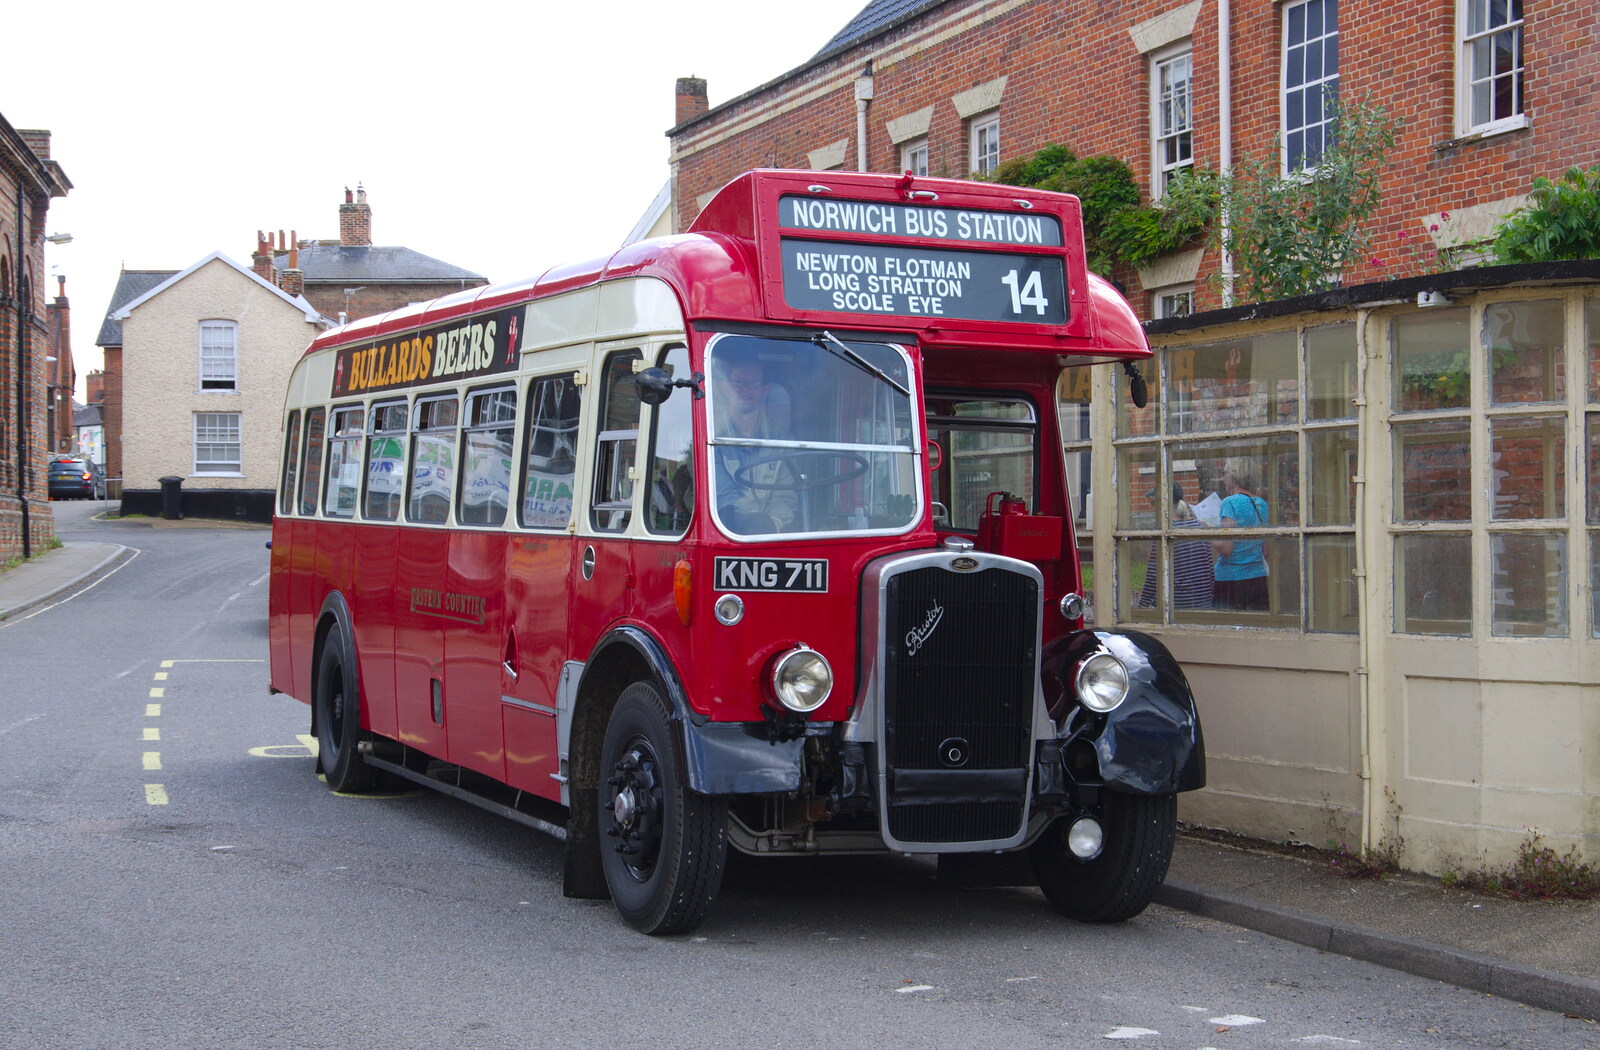 A vintage bus stops by the equally-vintage Eye bus stop from The Diss Carnival 2019, Diss, Norfolk - 9th June 2019